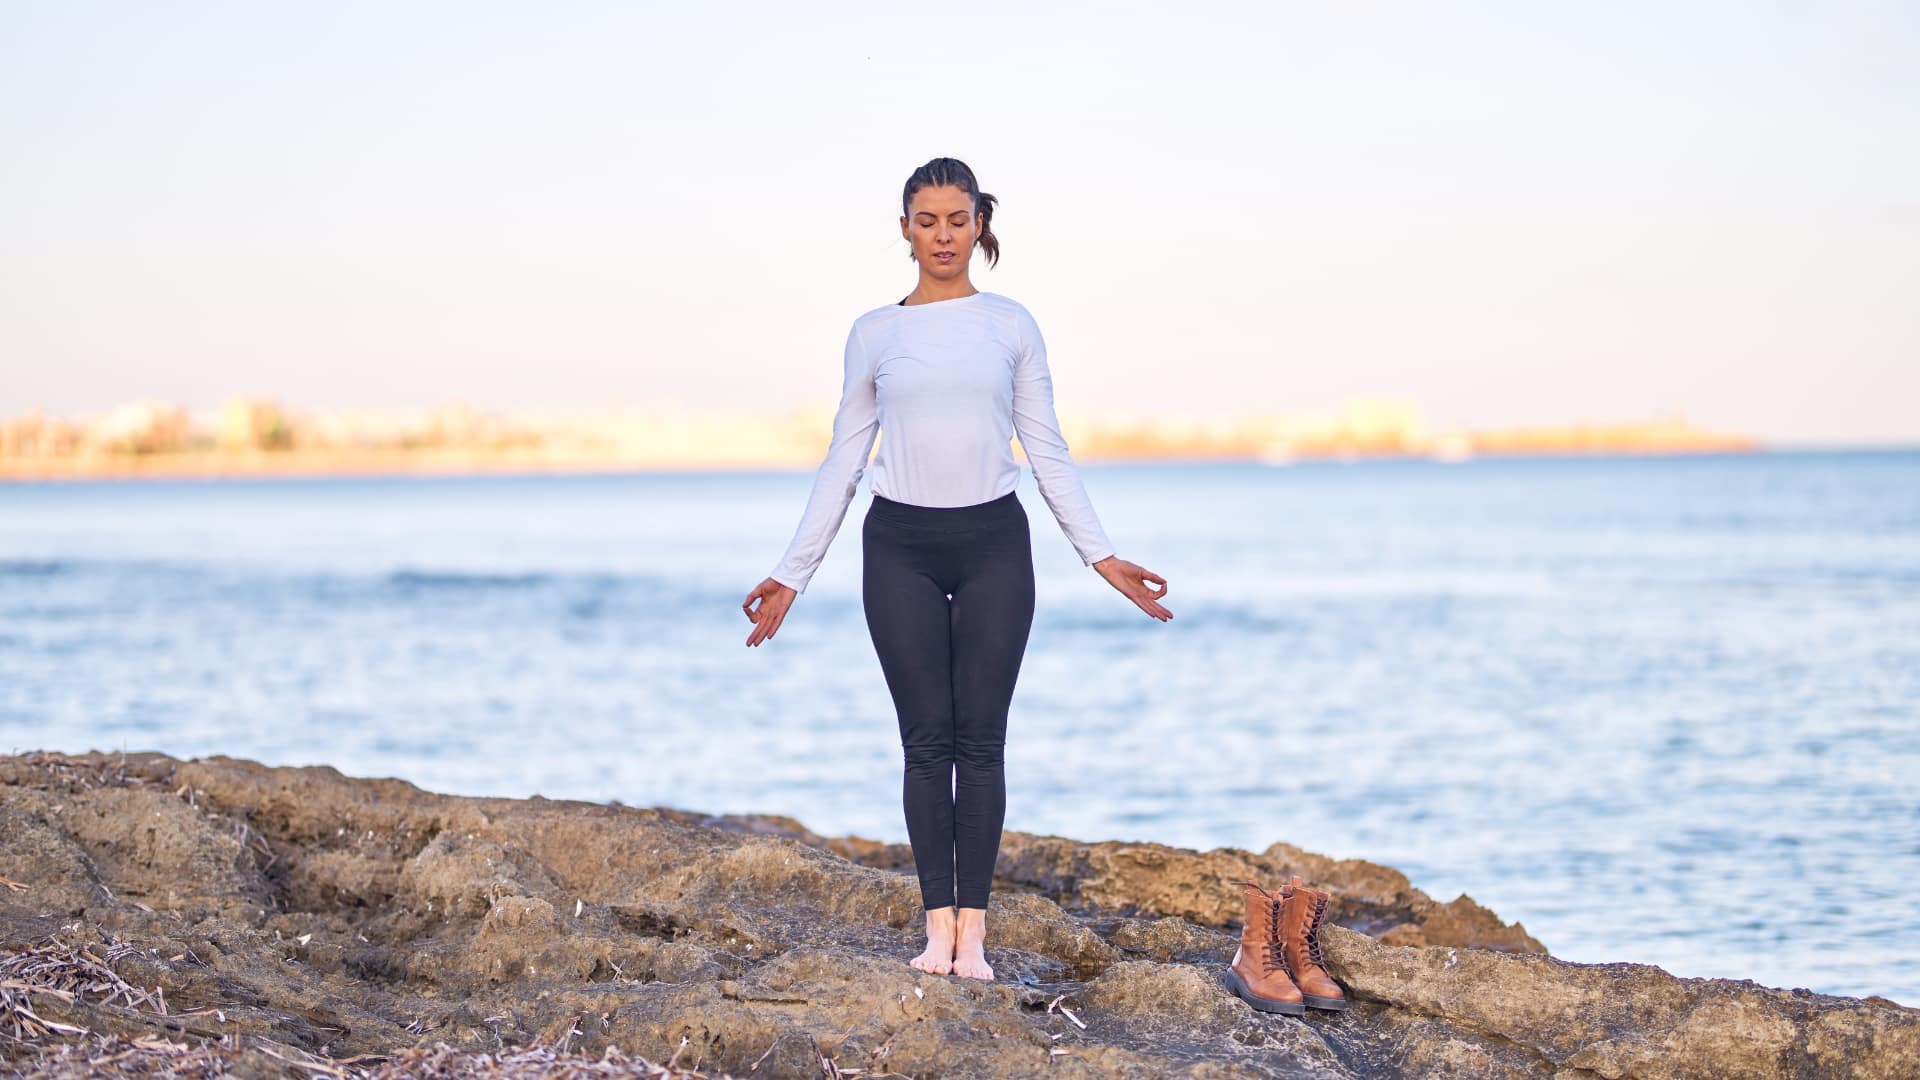 Woman in a white long sleeve tee and black leggings standing in mountain pose on a rocky surface in front of a body of water.